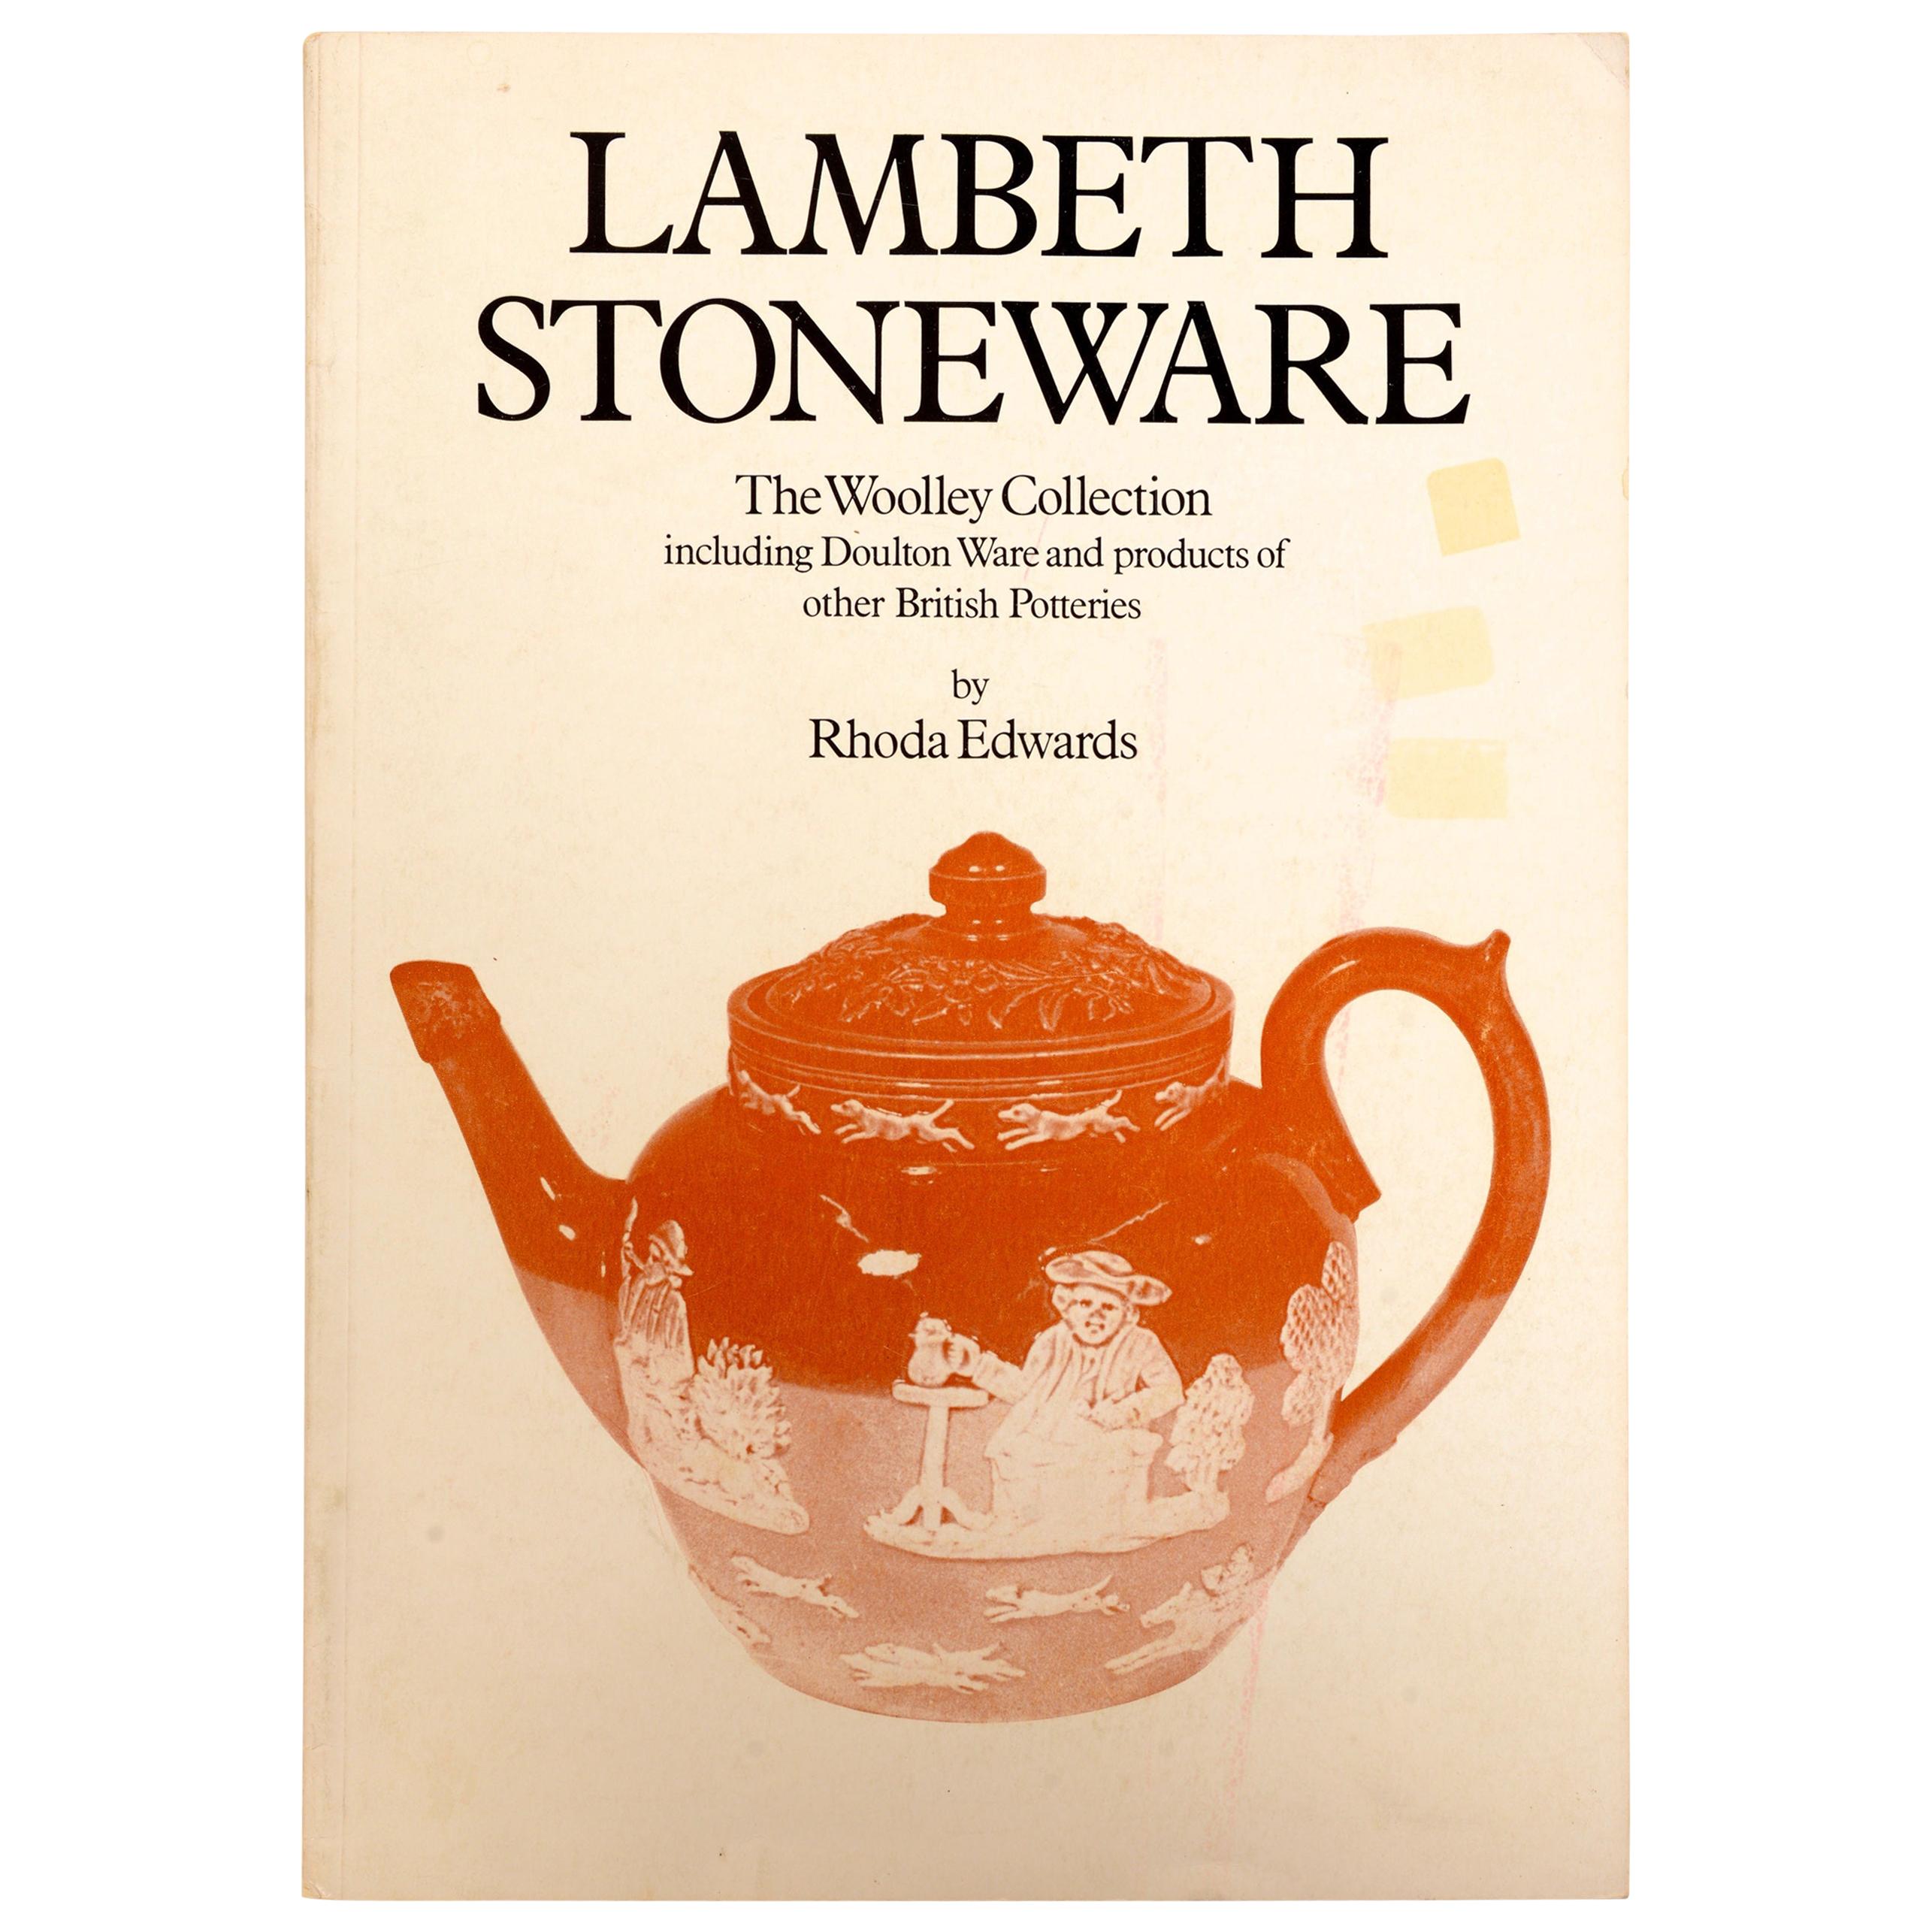 Lambeth Stoneware; The Woolley Collection, products of British Potteries For Sale